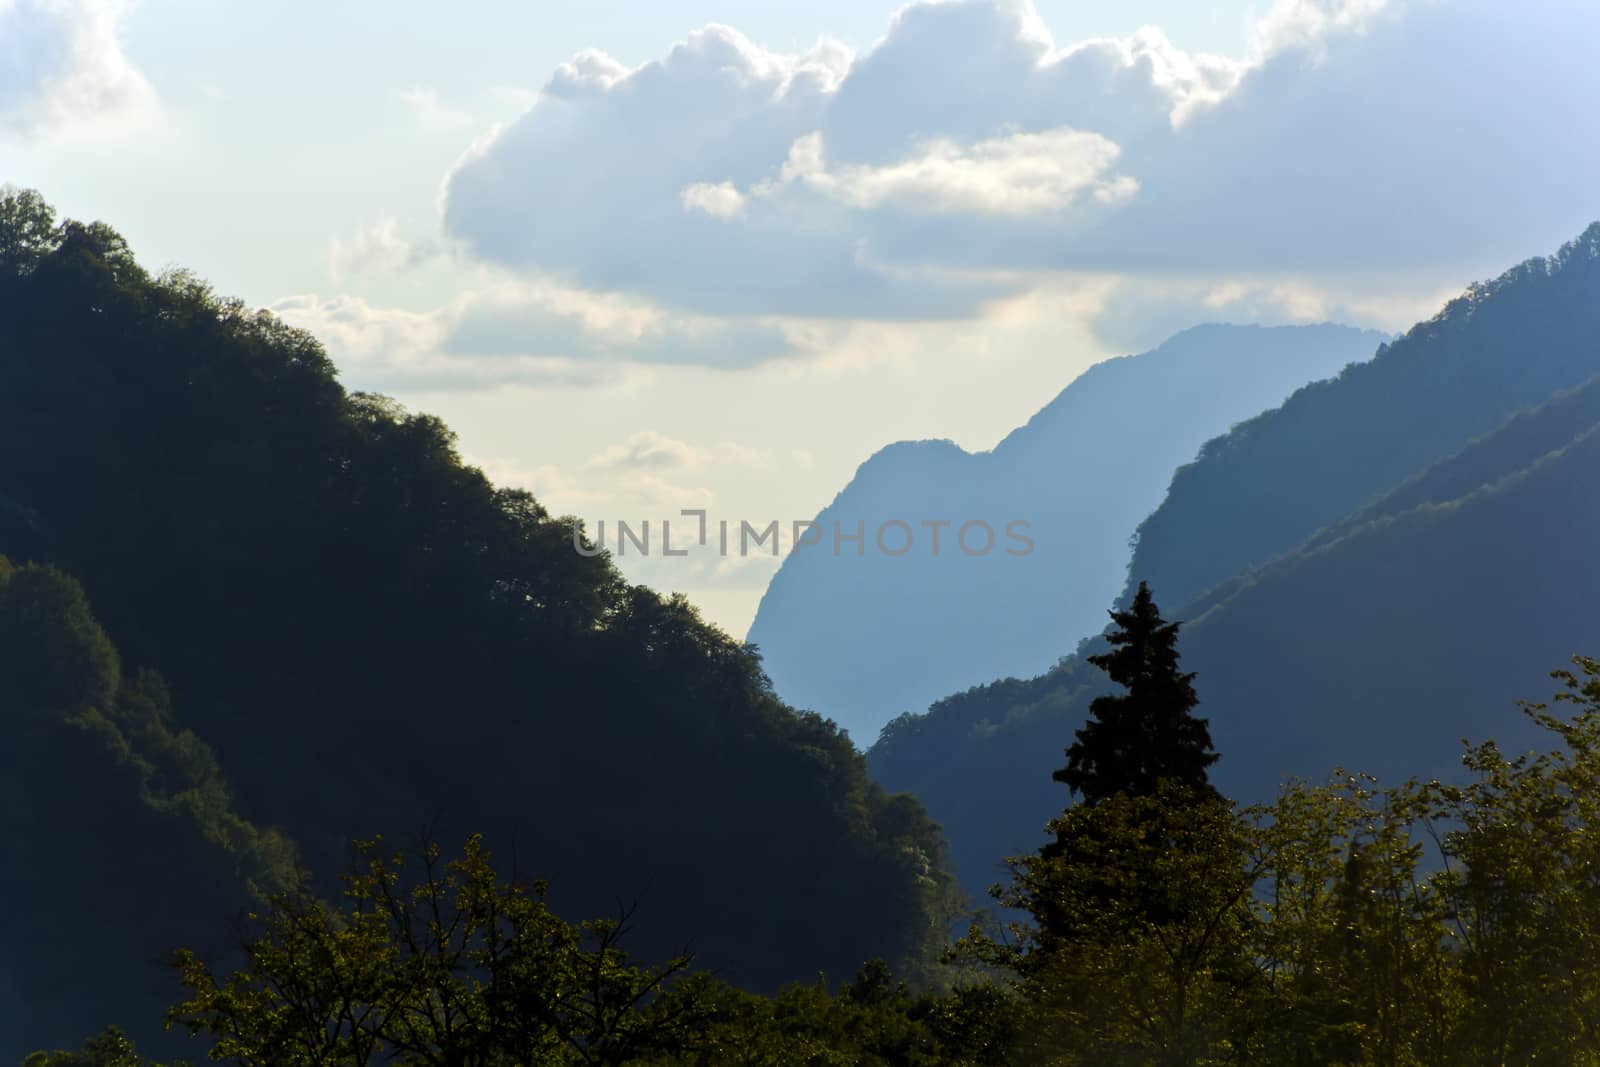 Summer picturesque landscape with Russian Caucasus rockies mountains with blue sky